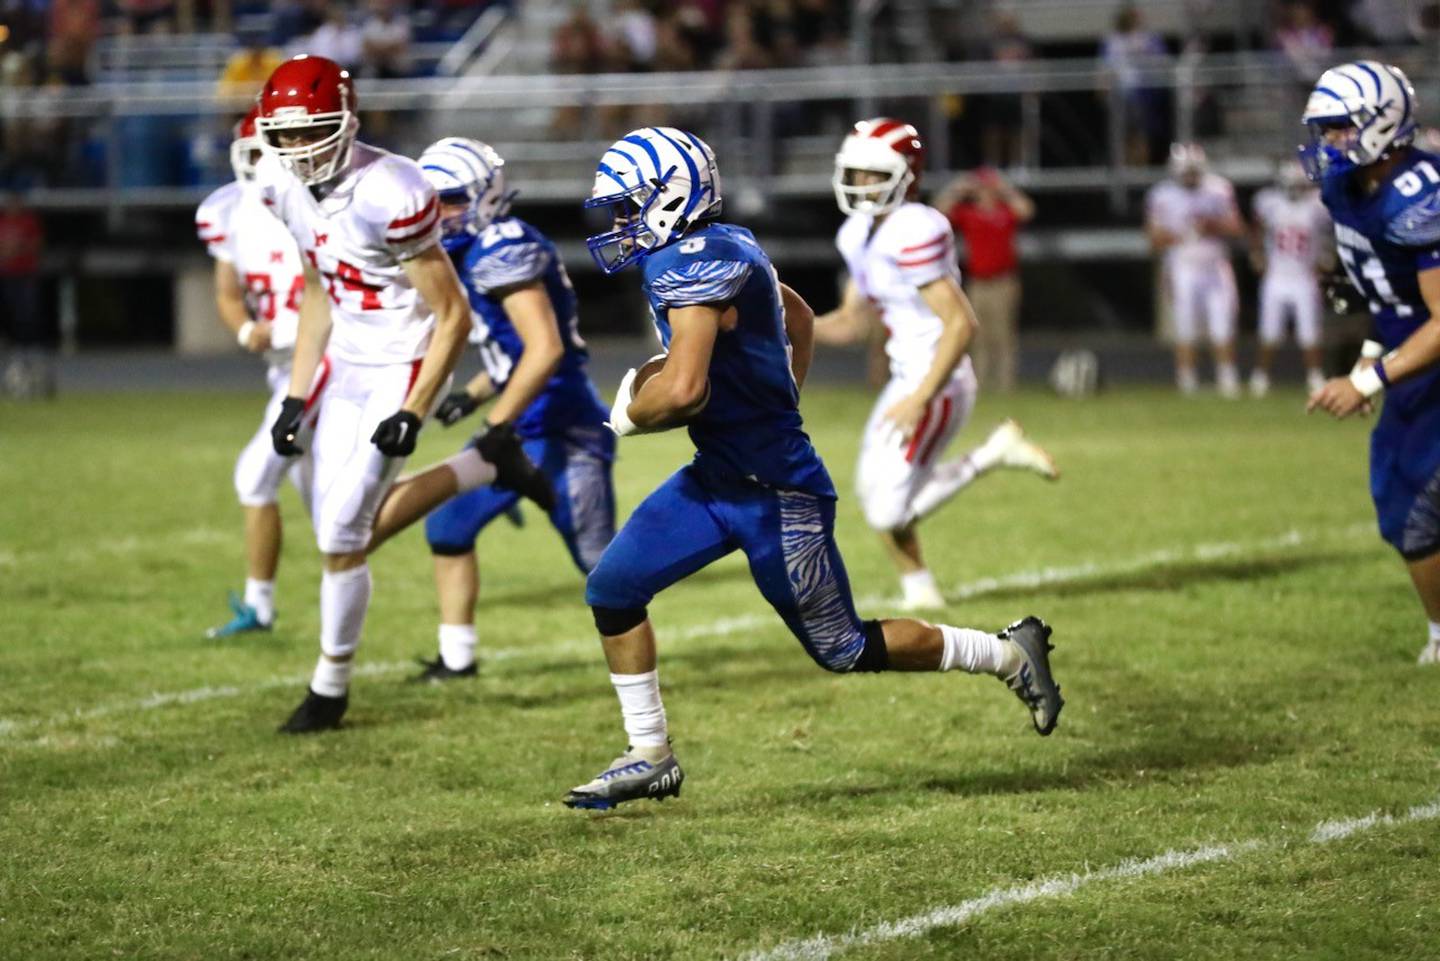 Princeton's Ace Christiansen races for a run against Morrison Friday night at Bryant Field.